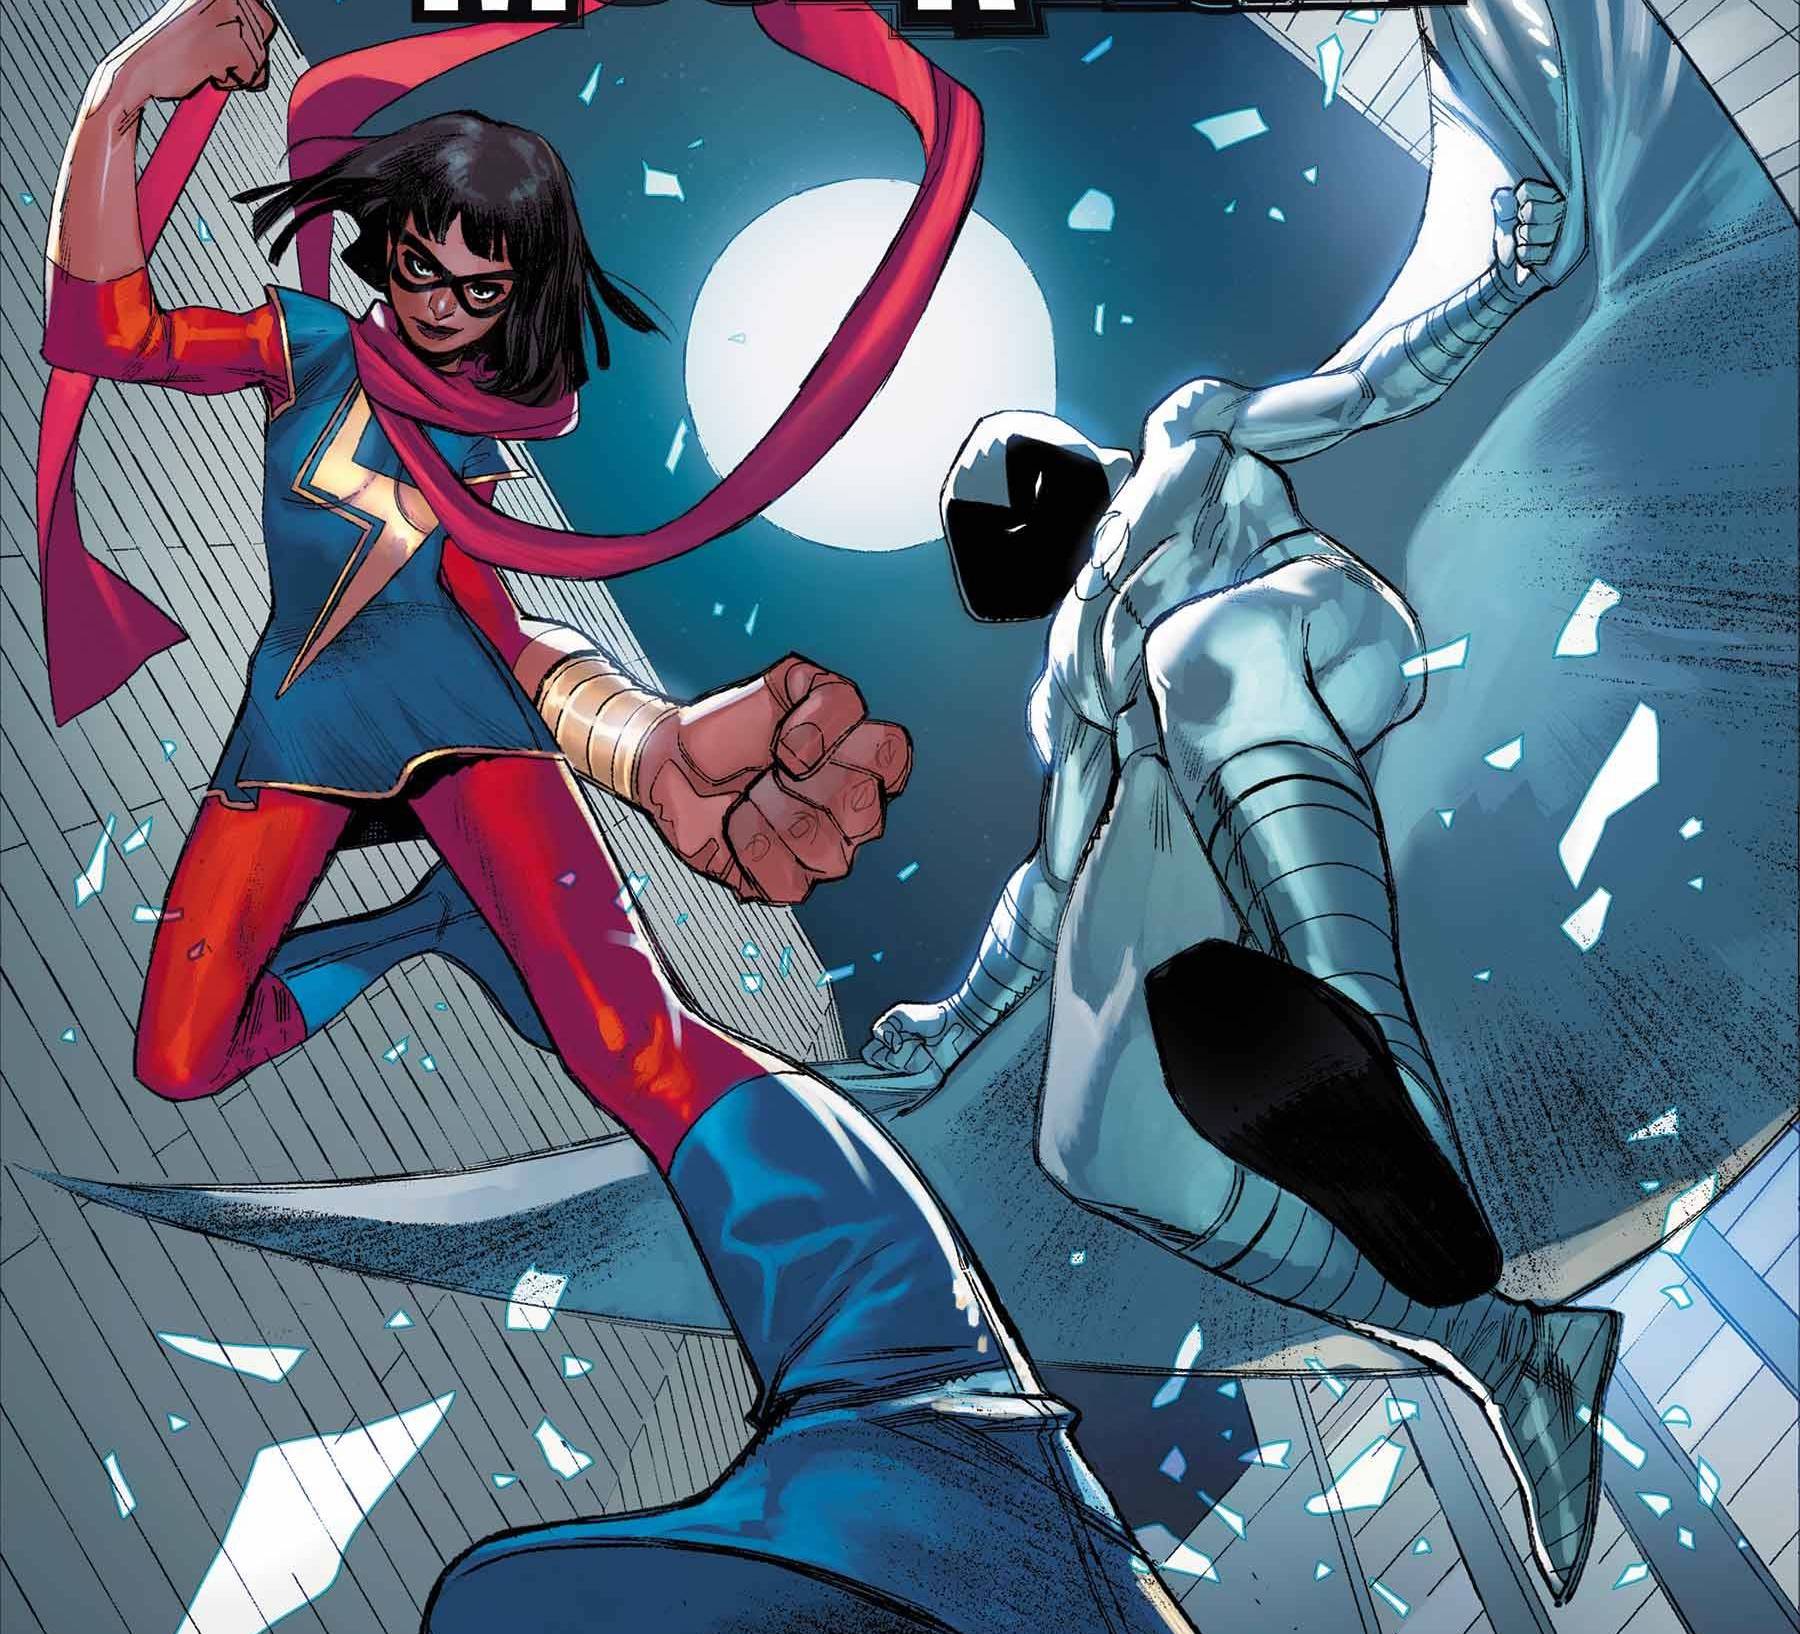 'Ms. Marvel & Moon Knight' #1 is the team-up you didn't know you needed